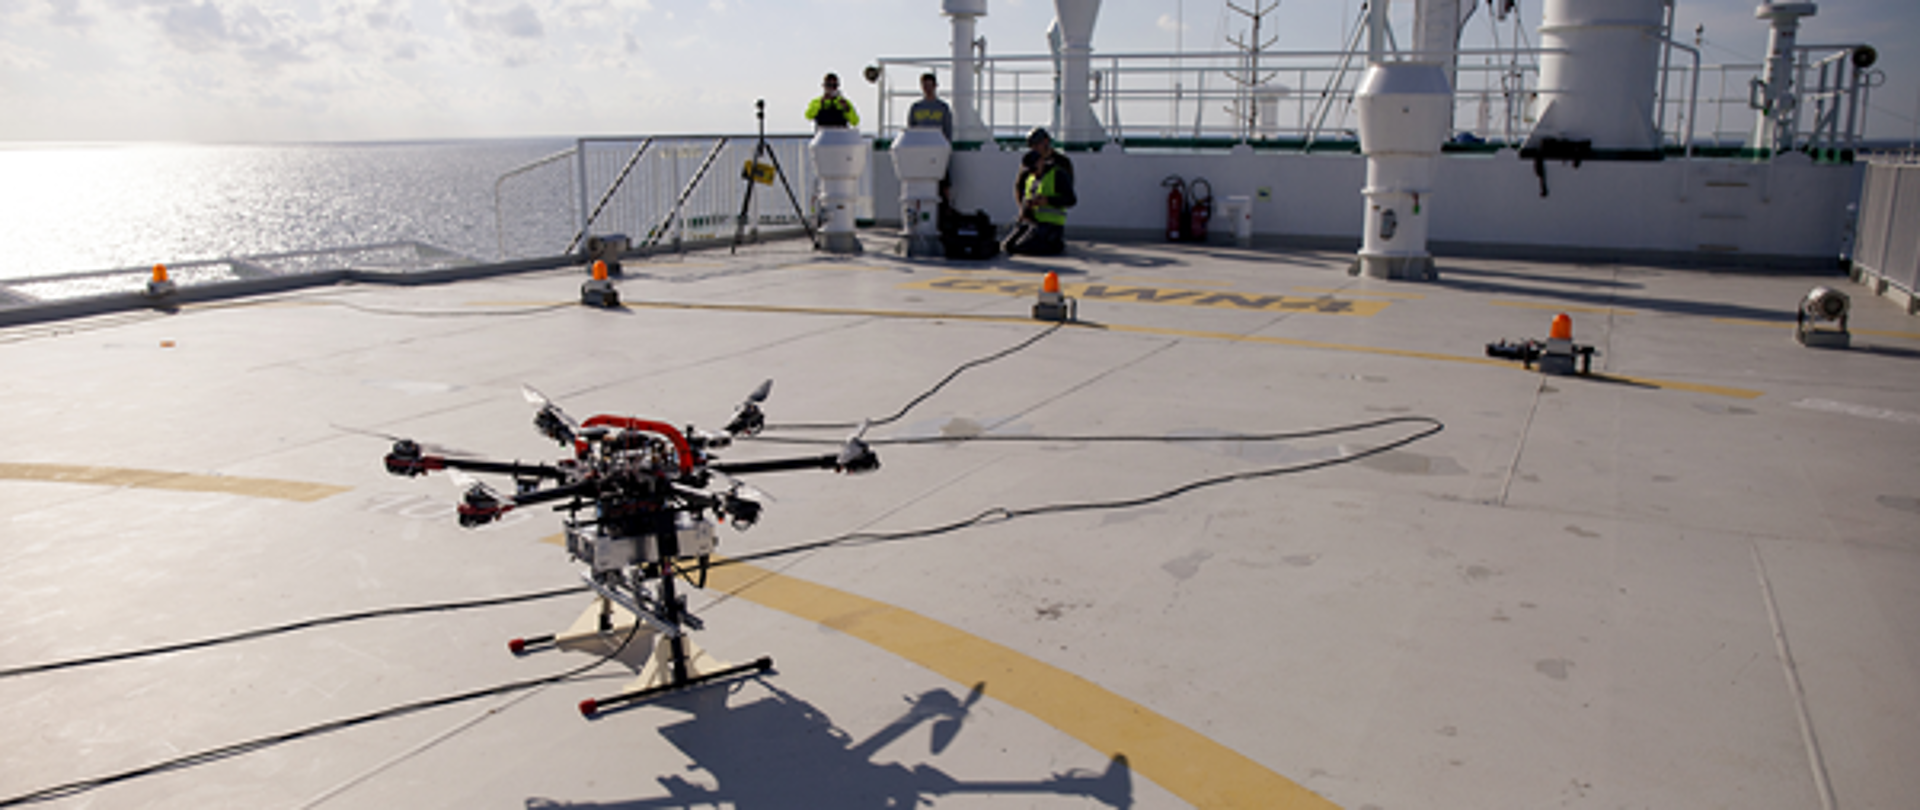 Tests of AVAL system components carried out at sea. The photo shows the drone landing on the ship